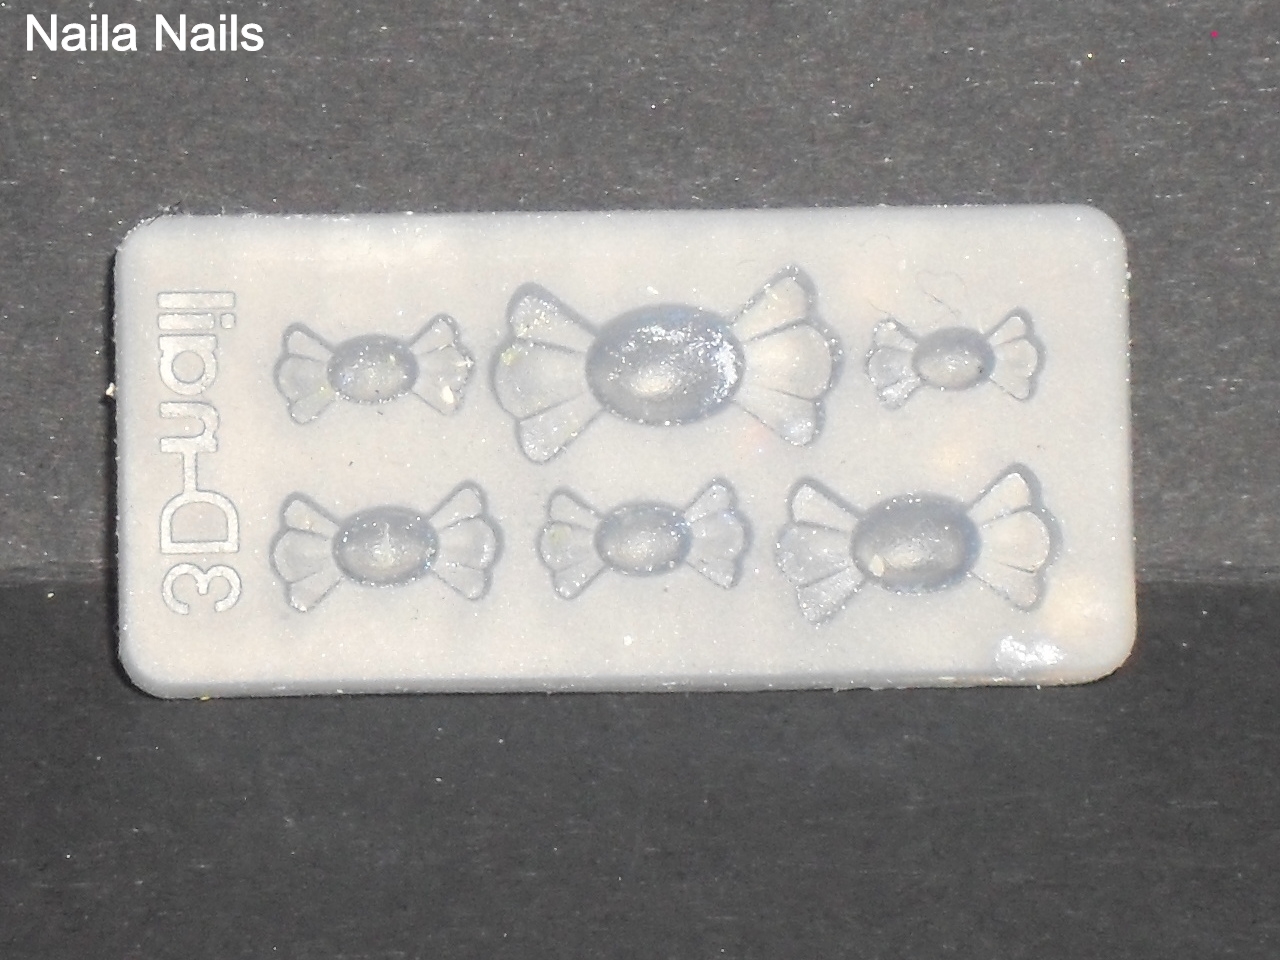 These 3D nail art molds are so cute! You get them in all sorts of designs